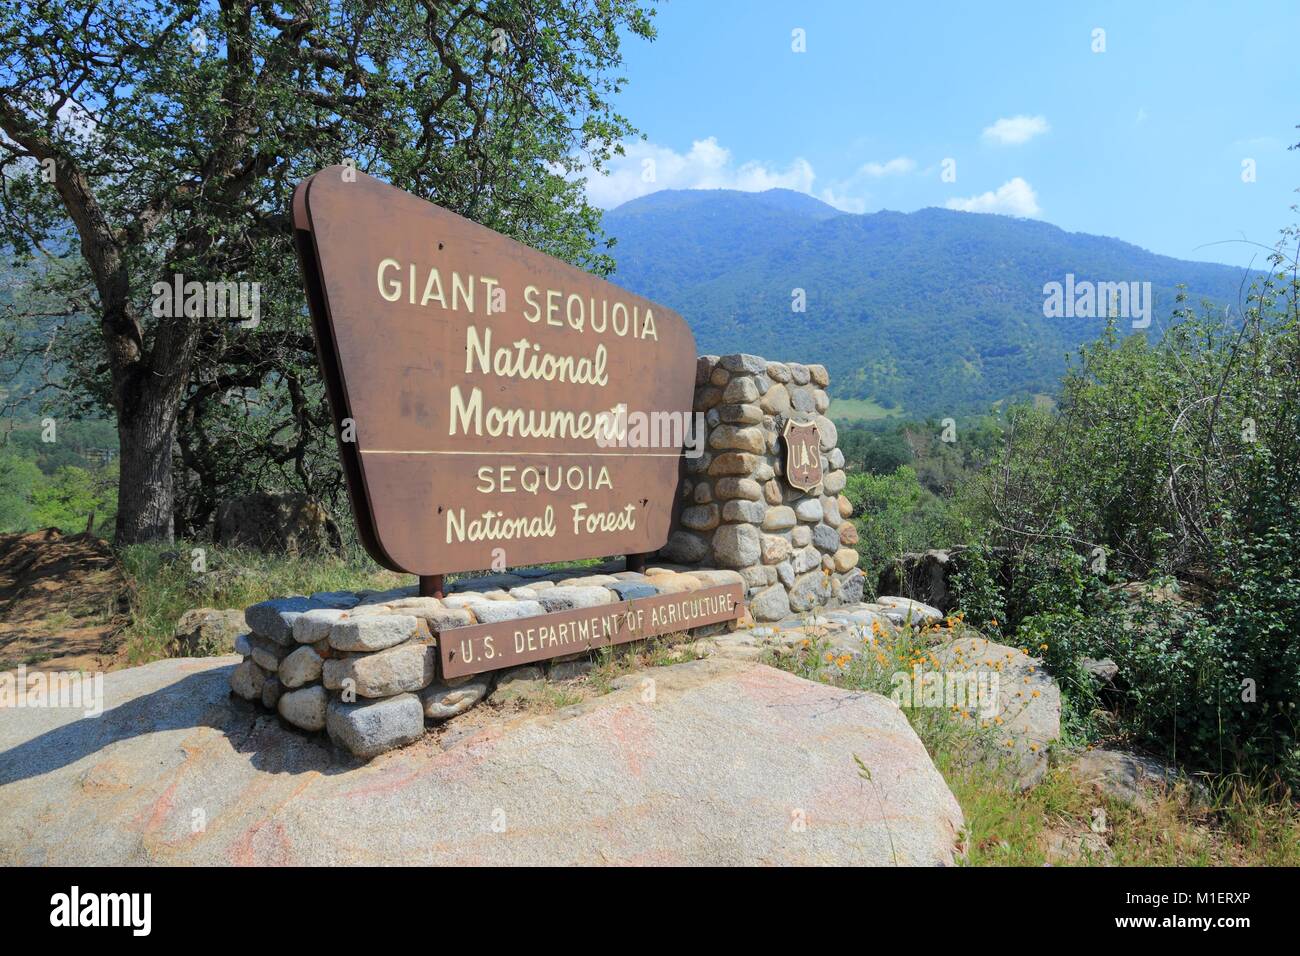 SPRINGVILLE, UNITED STATES - APRIL 12, 2014: Entrance sign to Giant Sequoia National Monument in California. National Monument was created in 2000 and Stock Photo